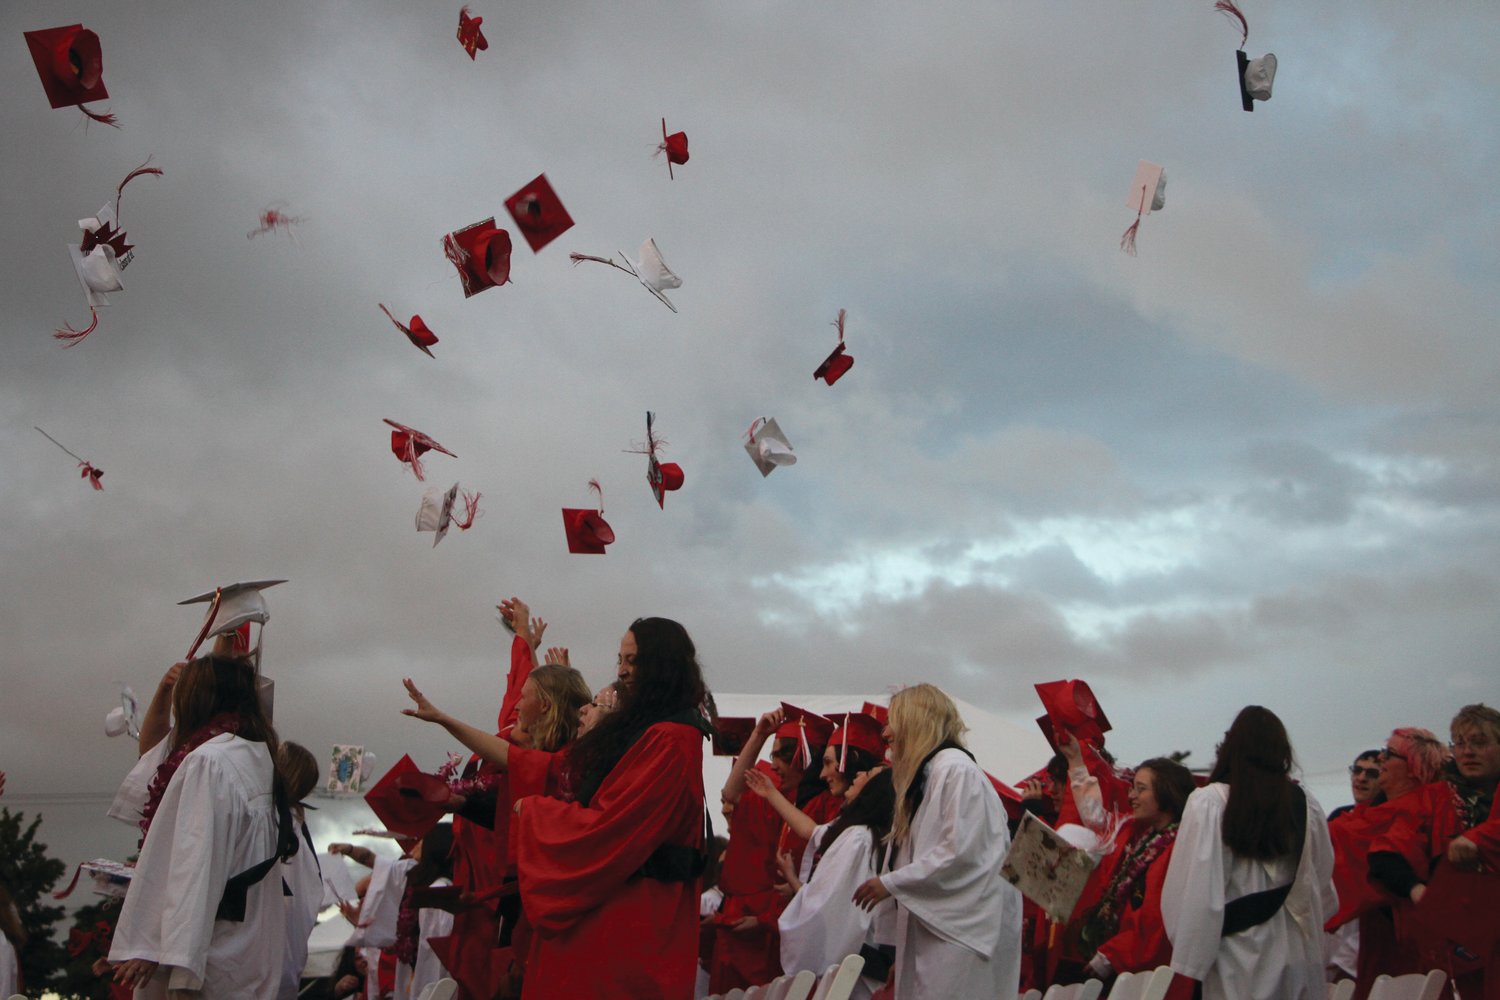 Graduates toss their caps into the setting sun and watch them fall back to earth like red and white raindrops.